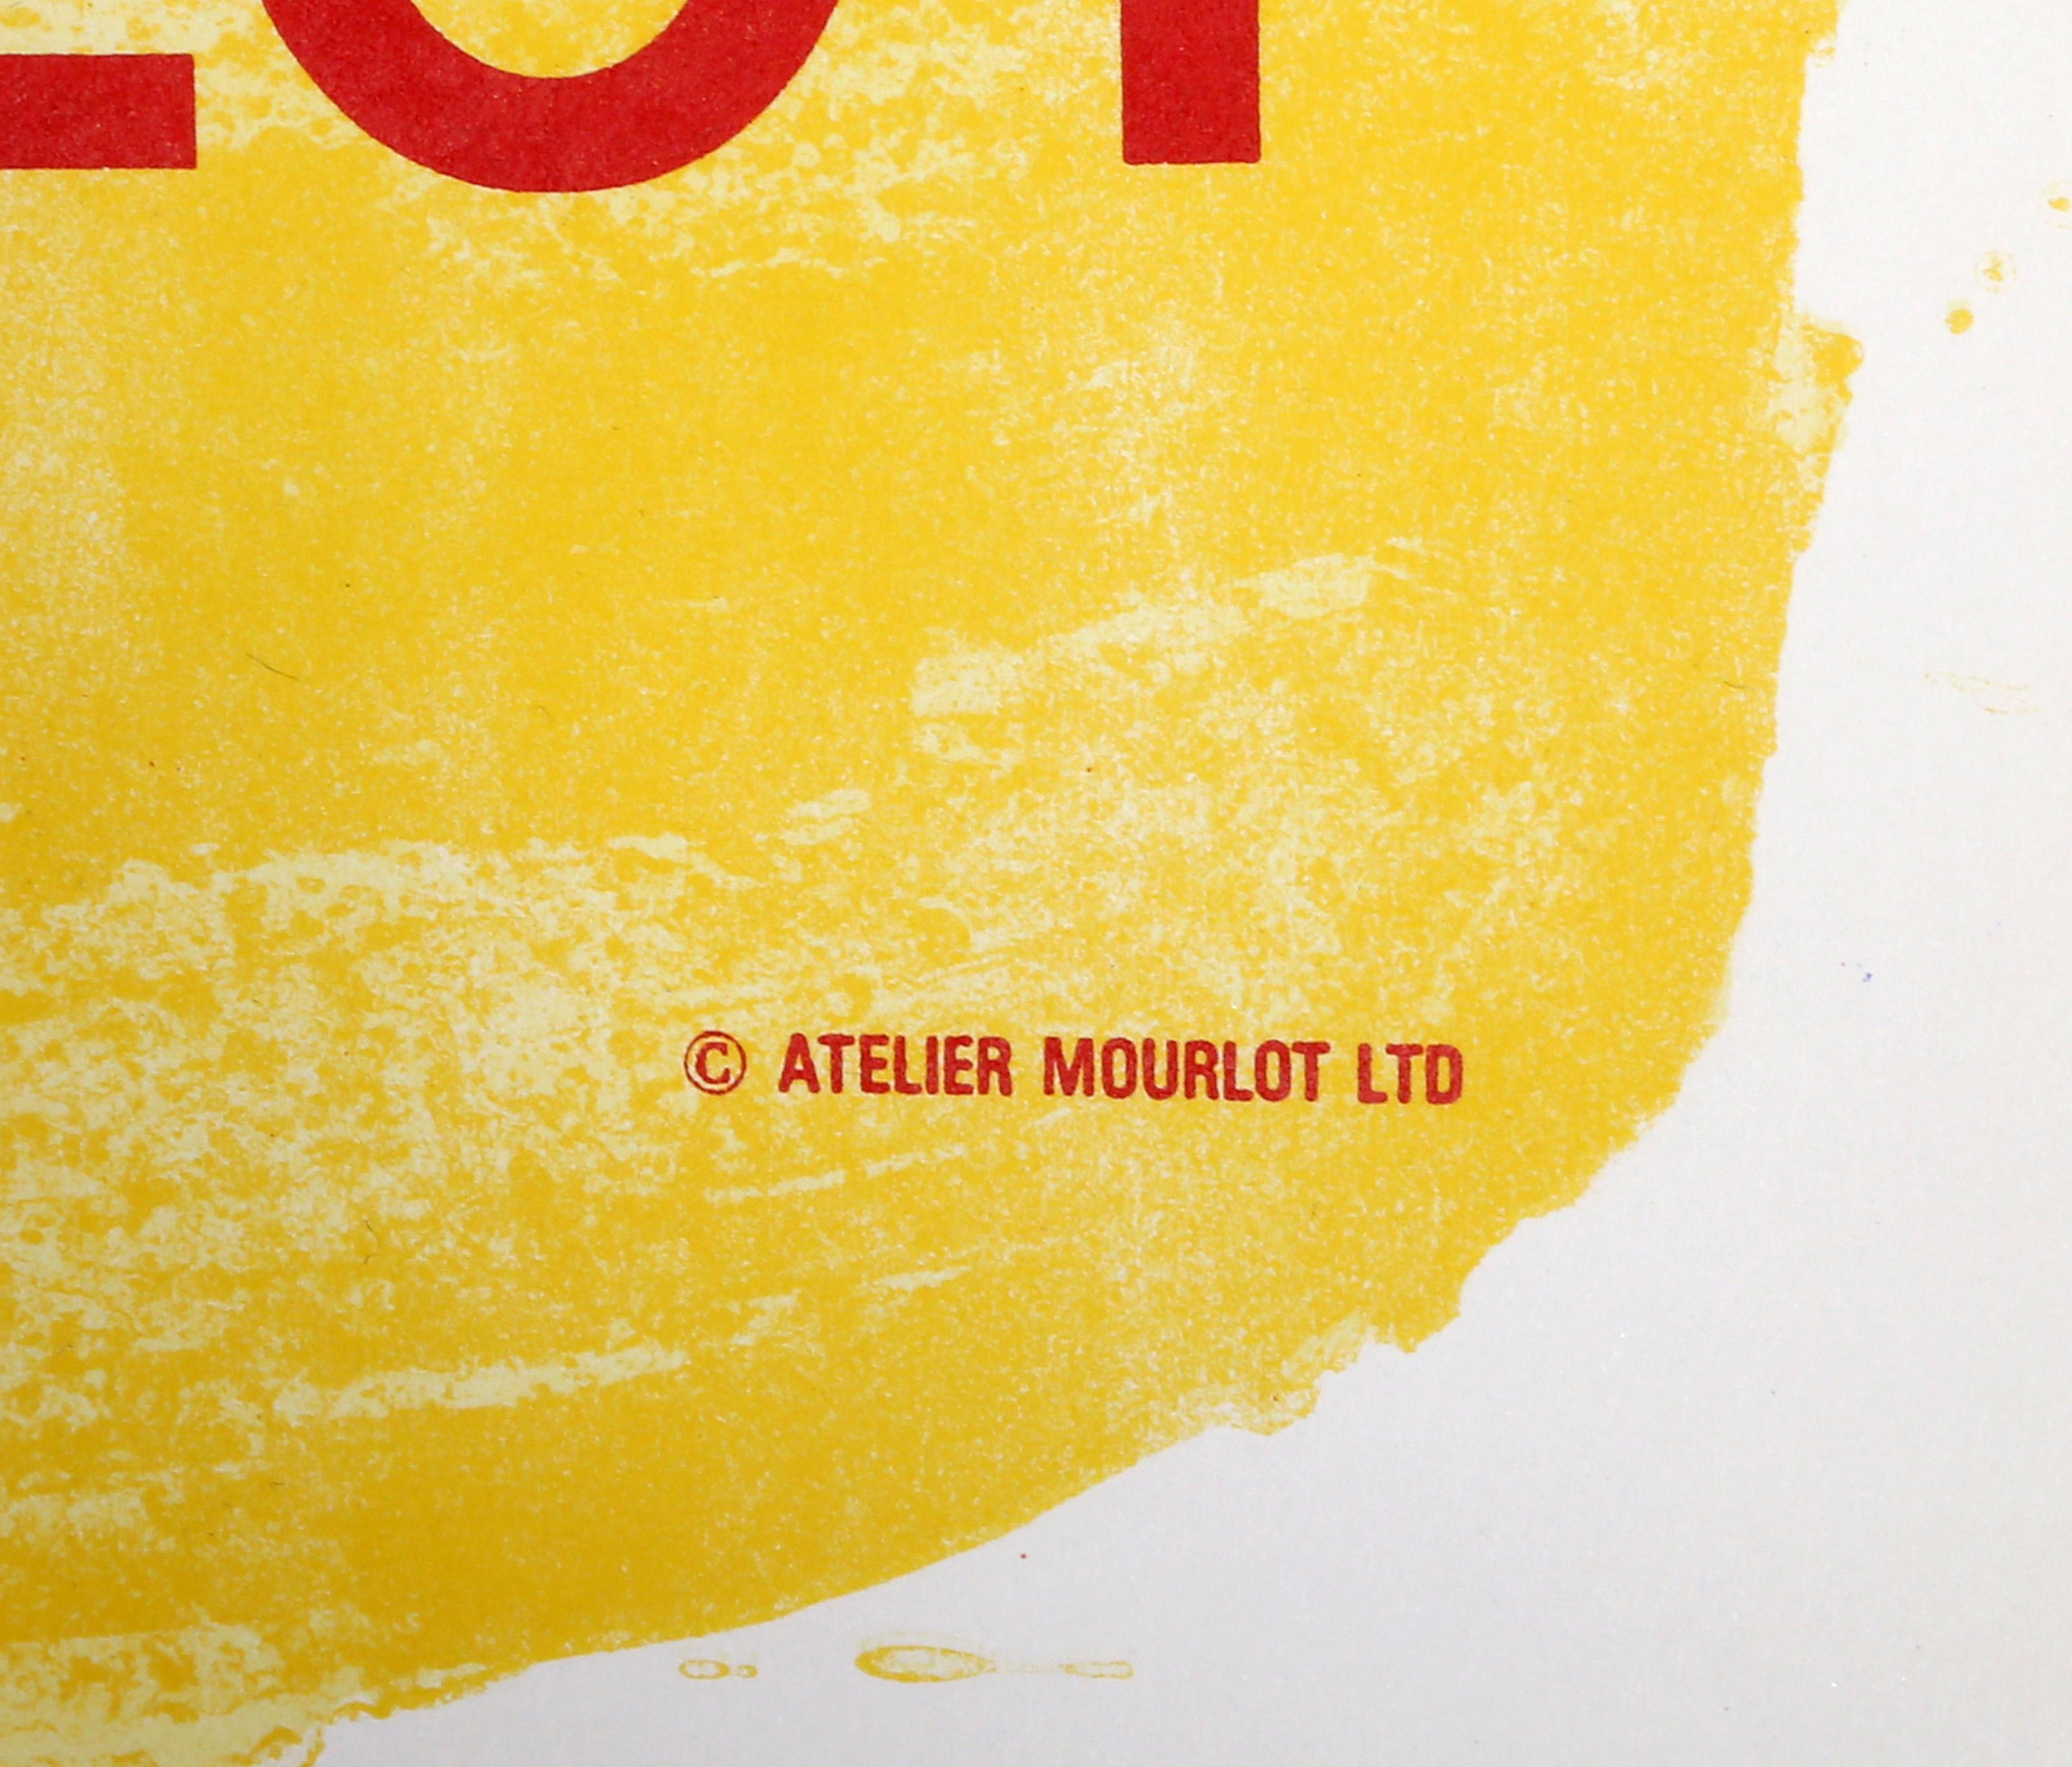 Atelier Mourlot, New York, Lithograph Poster by Alexander Calder For Sale 1